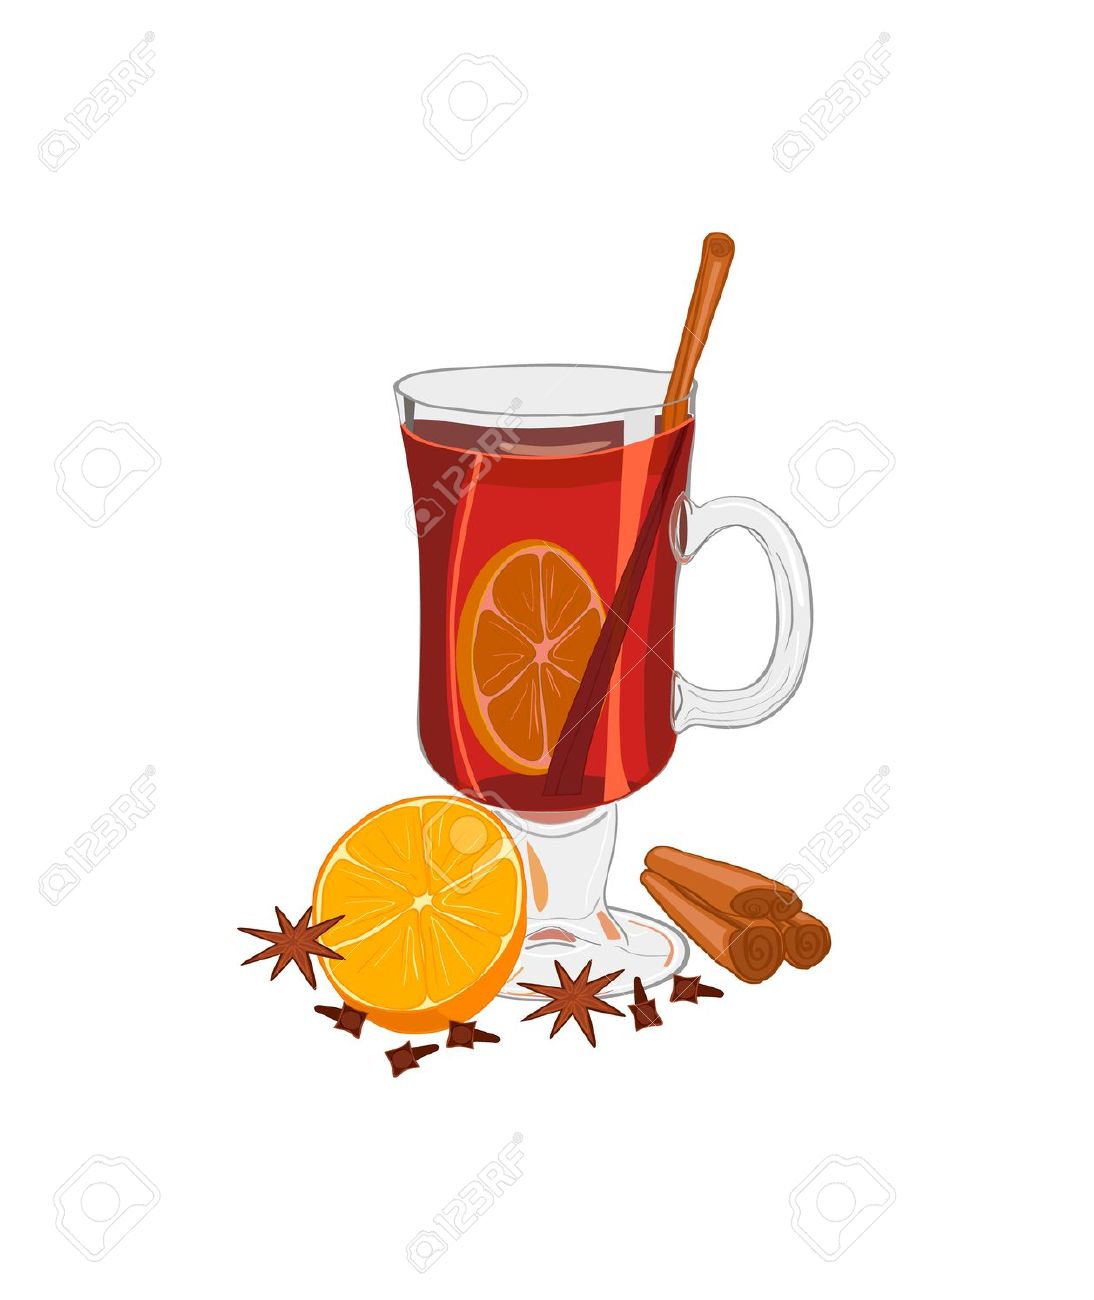 Mulled wine clipart.